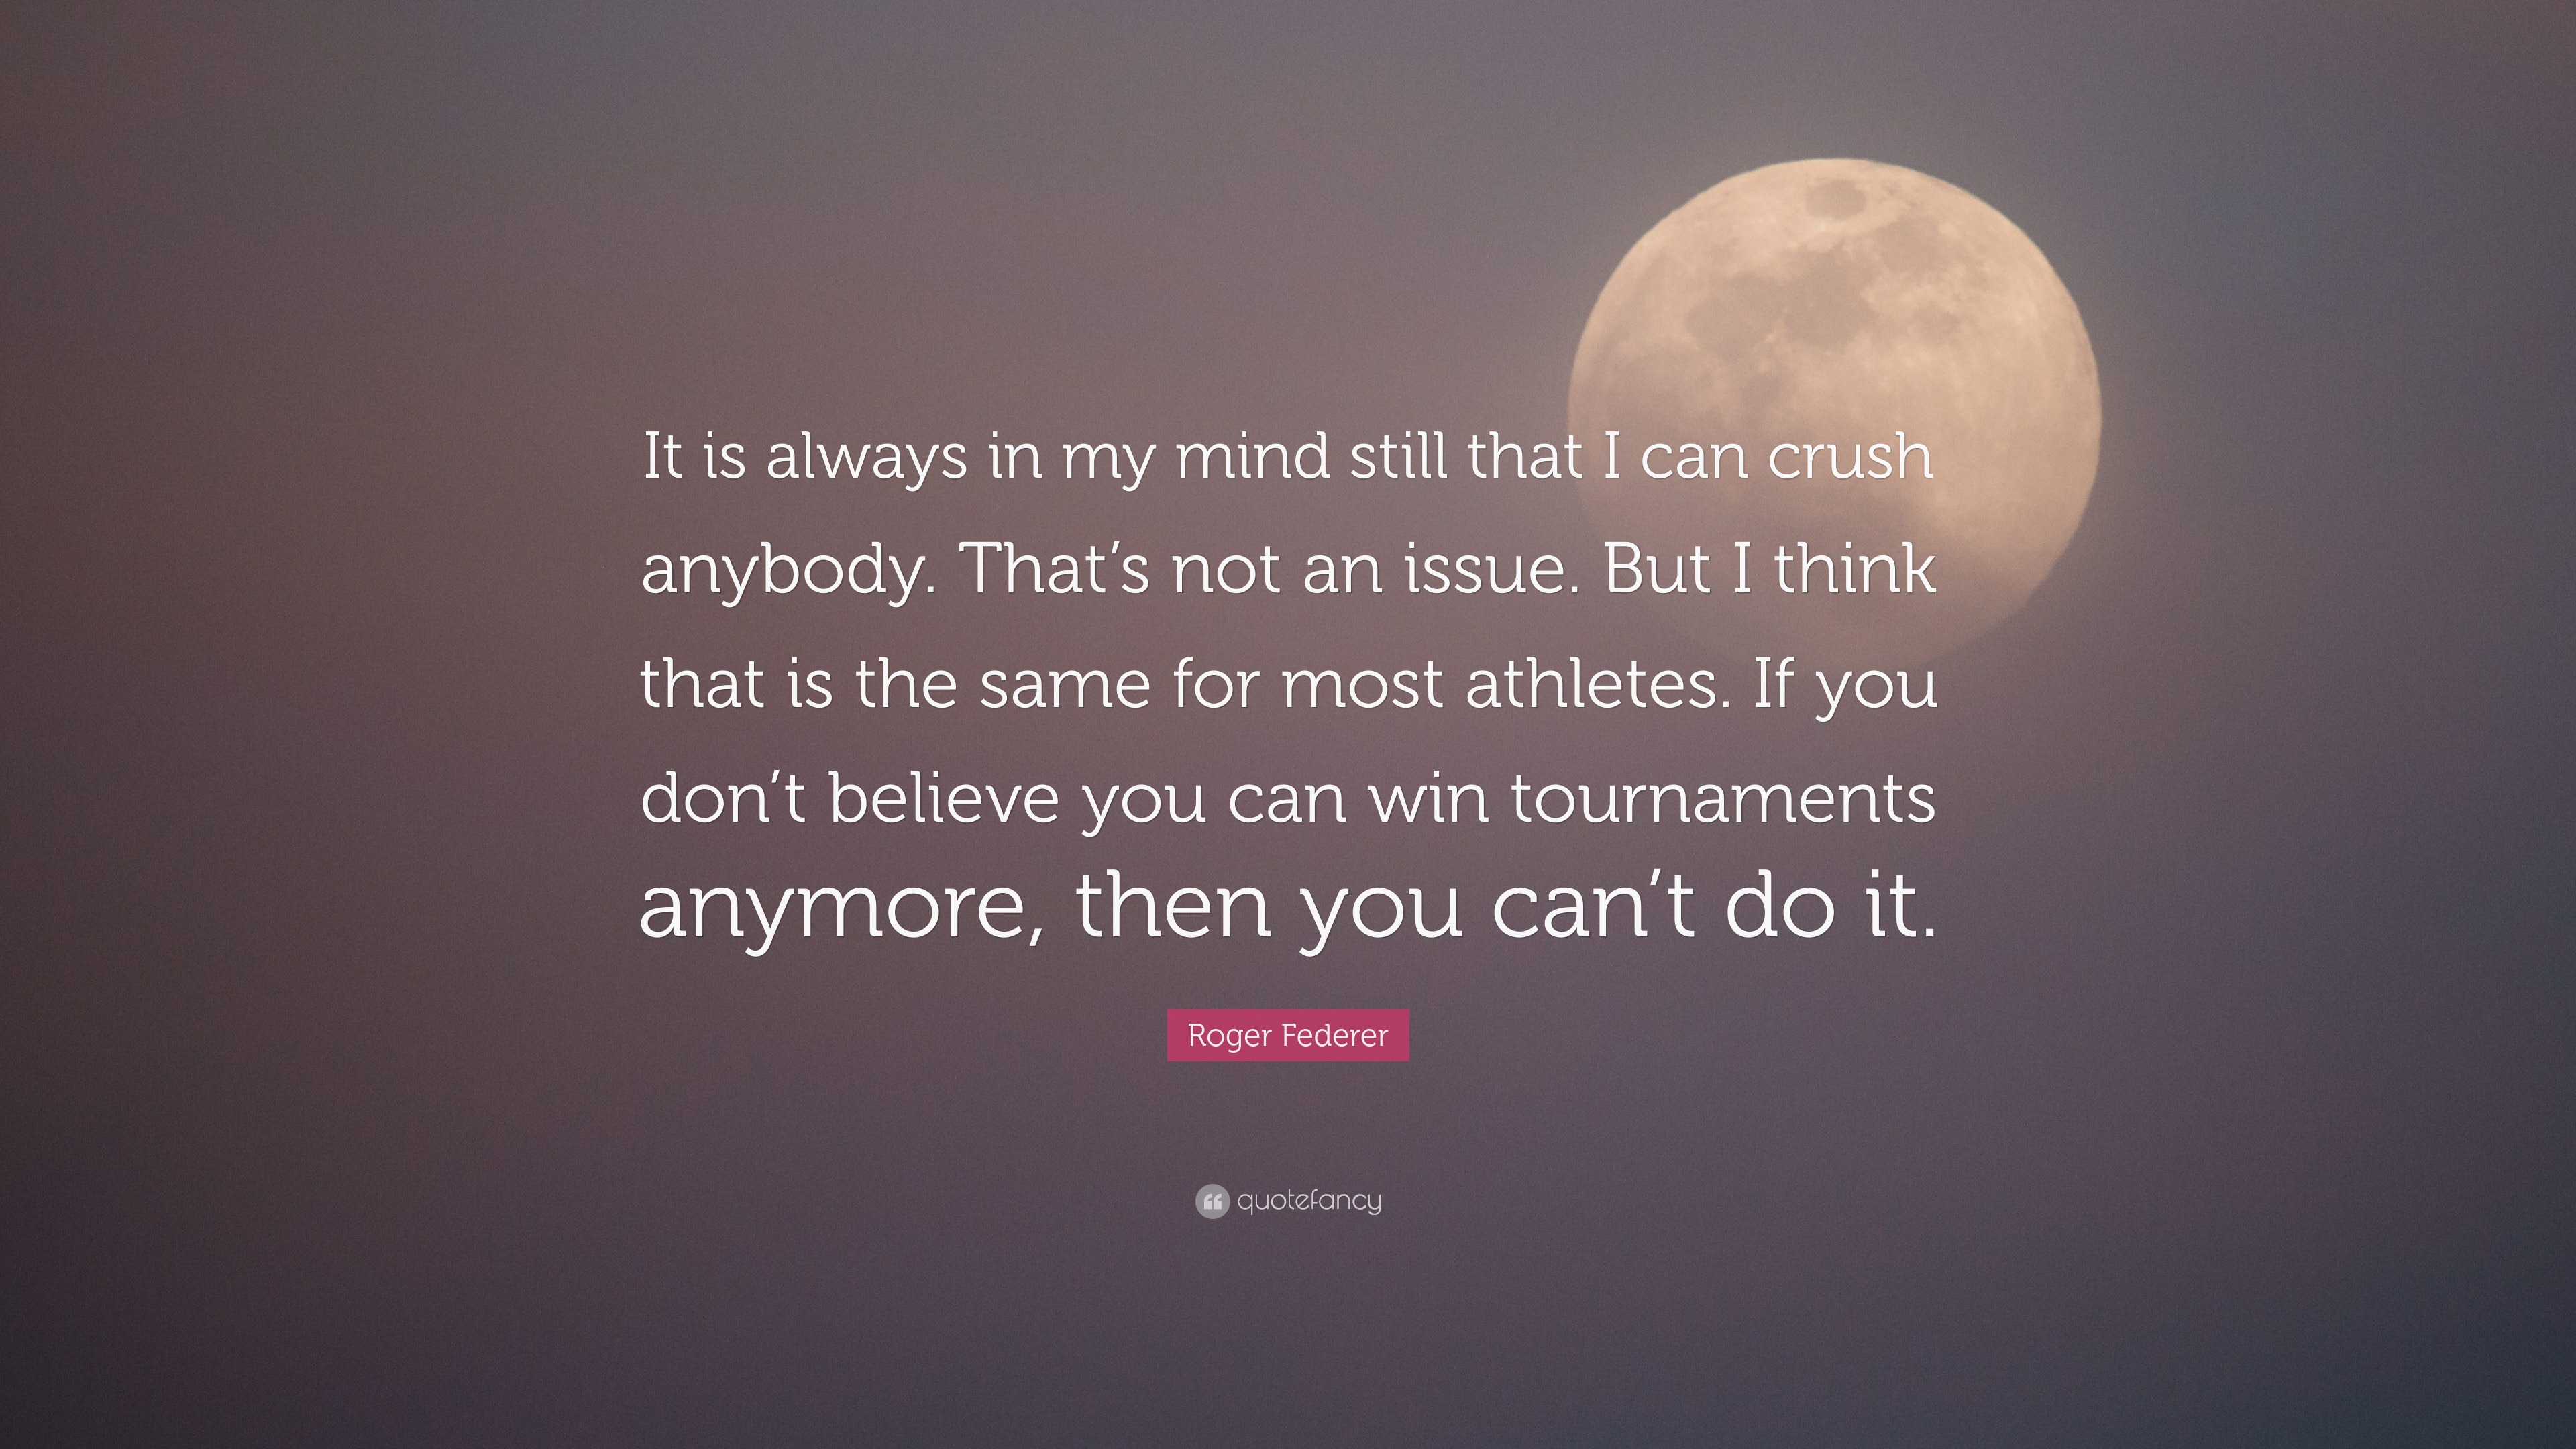 Roger Federer Quote It Is Always In My Mind Still That I Can Crush Anybody That S Not An Issue But I Think That Is The Same For Most Athle 9 Wallpapers Quotefancy